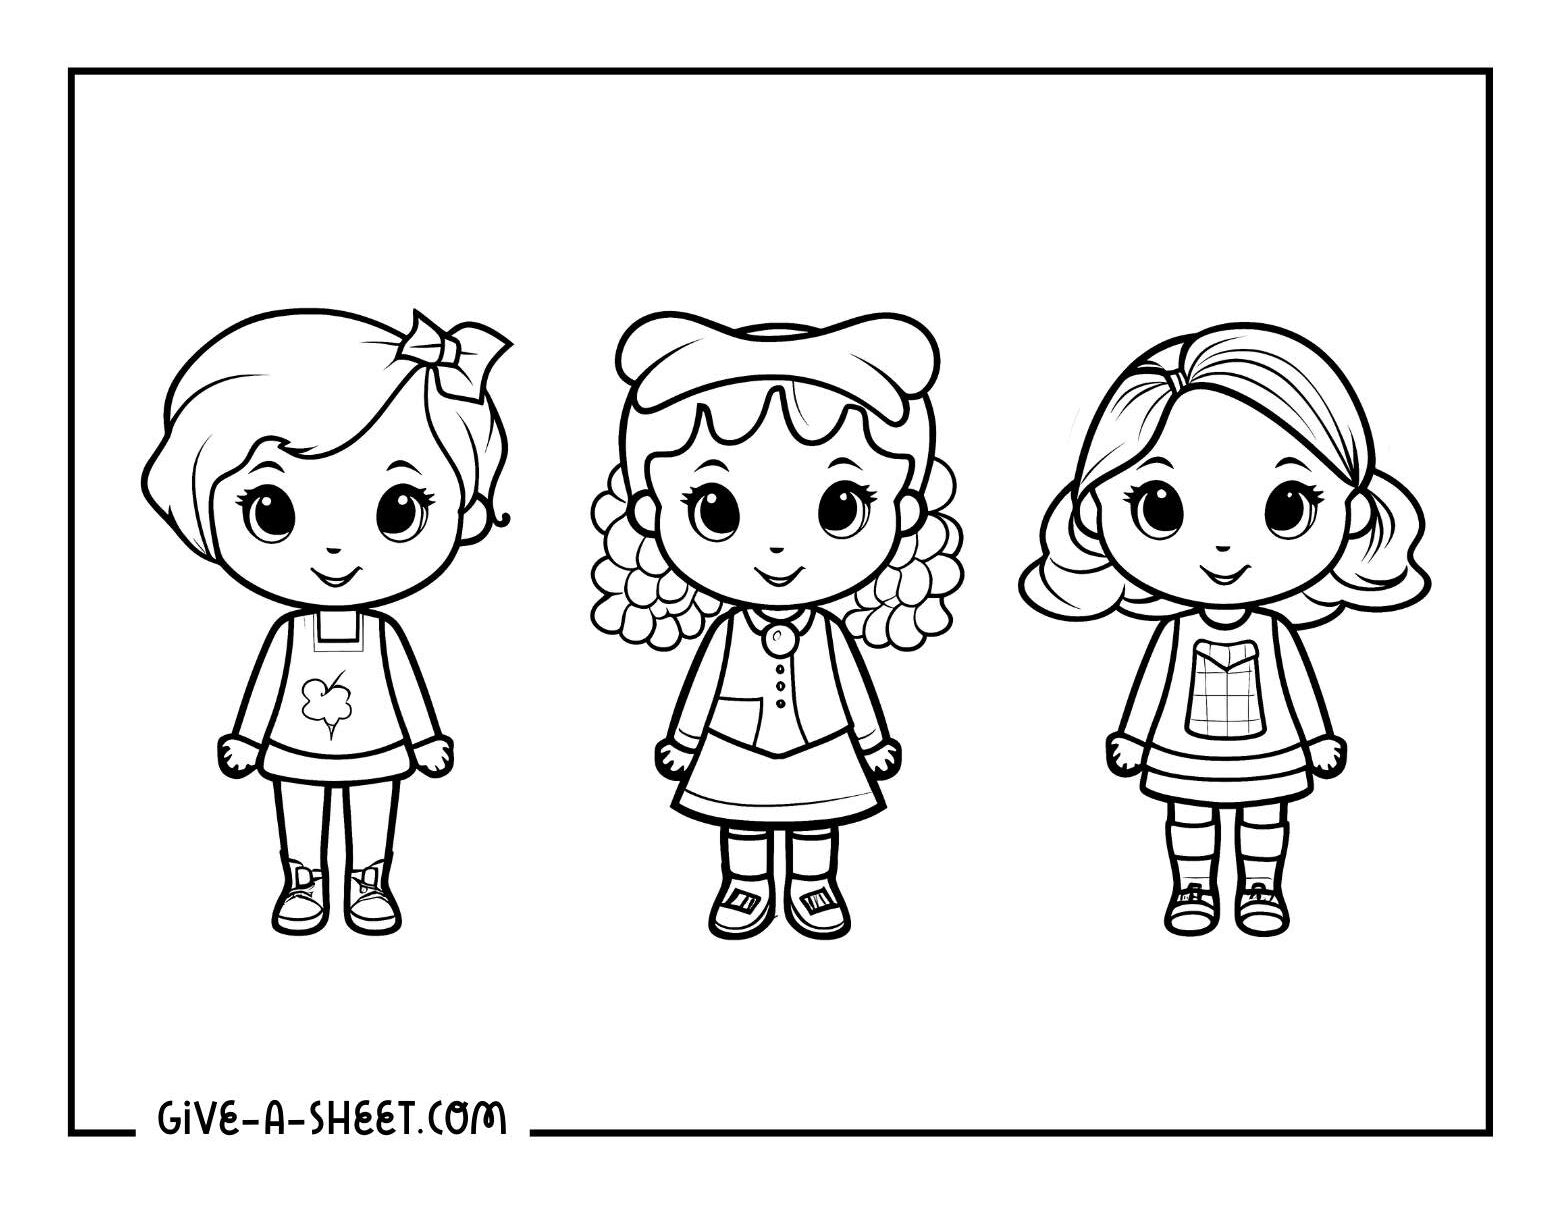 Kawaii three best friends coloring pages for kids.